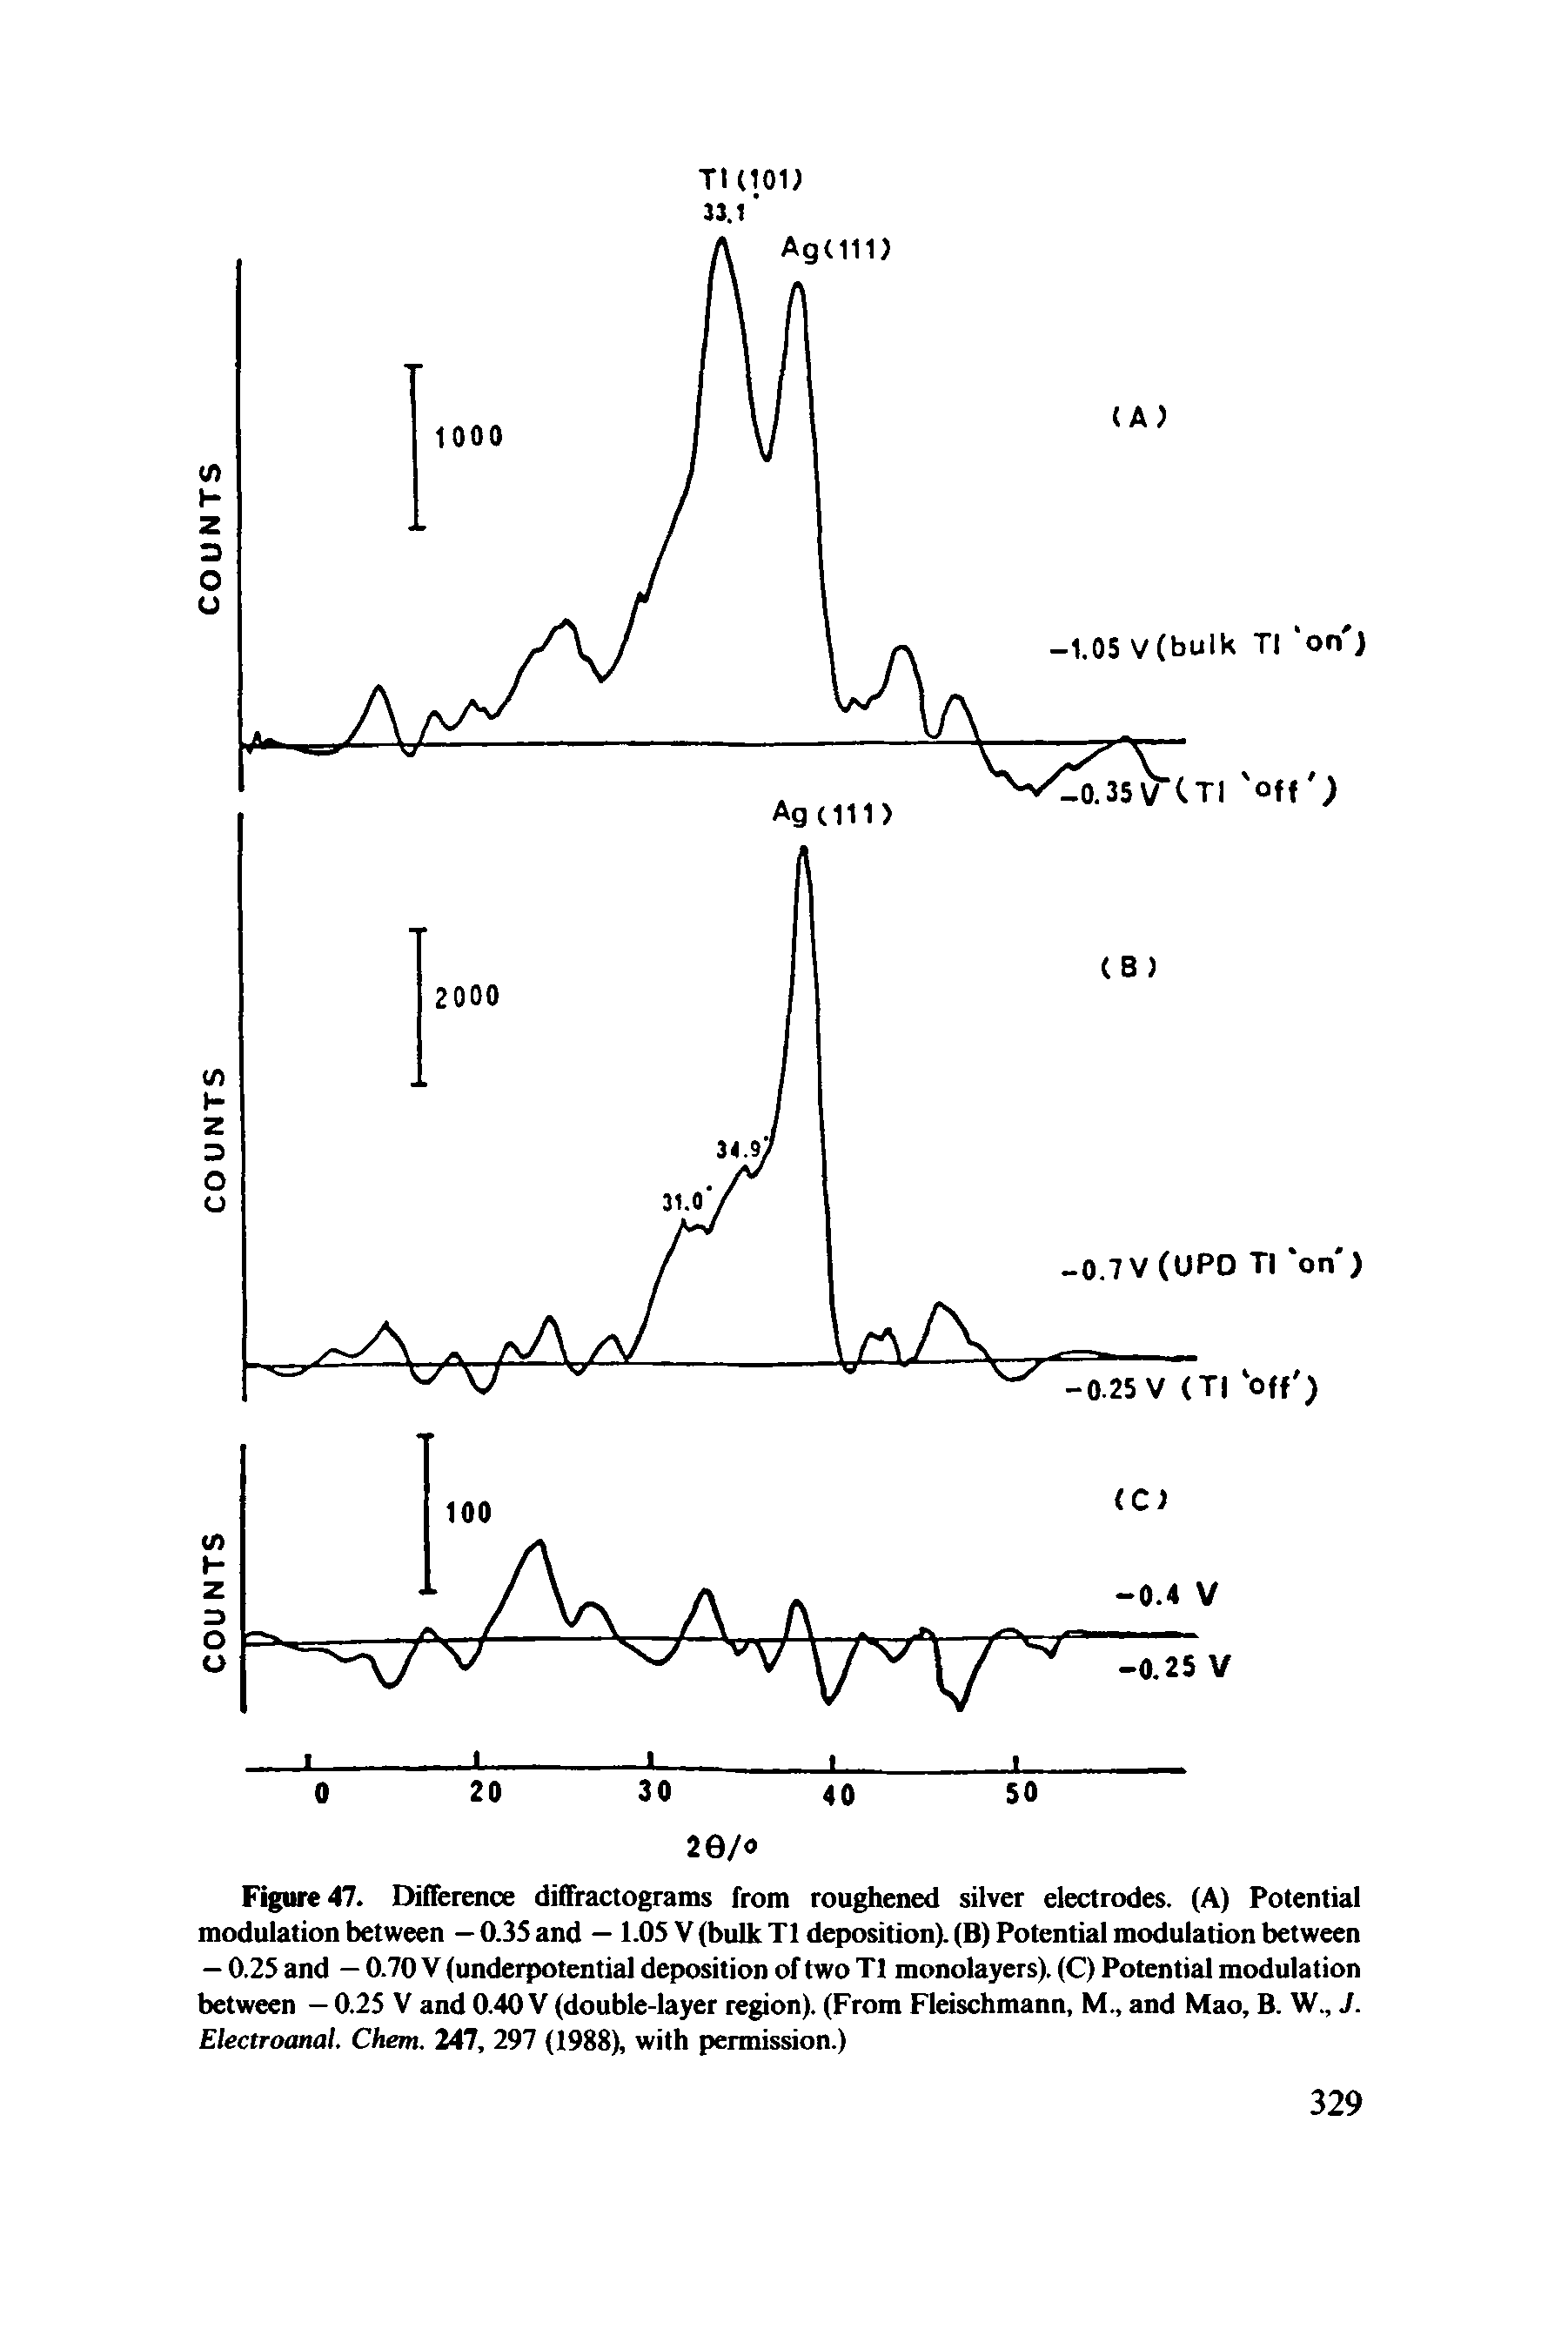 Figure 47. Difference diffractograms from roughened silver electrodes. (A) Potential modulation between — 0.35 and — 1.05 V (bulk Tl deposition). (B) Potential modulation between — 0.25 and — 0.70 V (underpotential deposition of two Tl monolayers). (C) Potential modulation between — 0.25 V and 0.40 V (double-layer region). (From Fleischmann, M., and Mao, B. W., J. Electroanal. Chem. 247, 297 (1988), with permission.)...